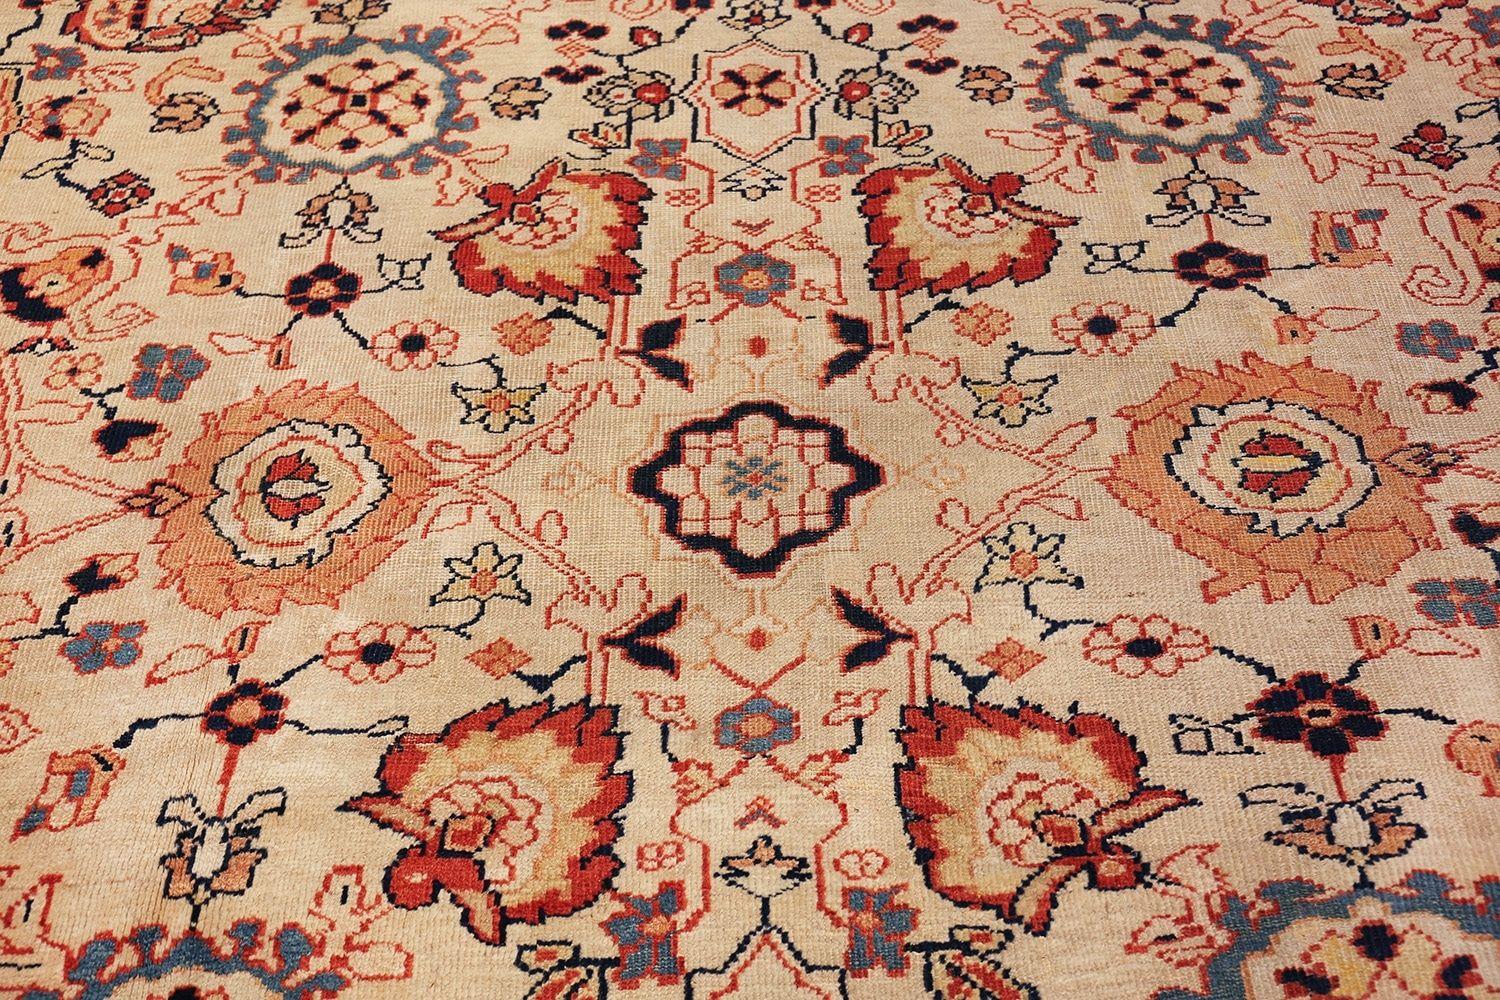 Beautiful Room Size Size Ivory Background Persian Antique Sultanabad Rug, Country of Origin: Persia, Circa Date: Late 19th Century. Size: 11 ft x 14 ft 4 in (3.35 m x 4.37 m).